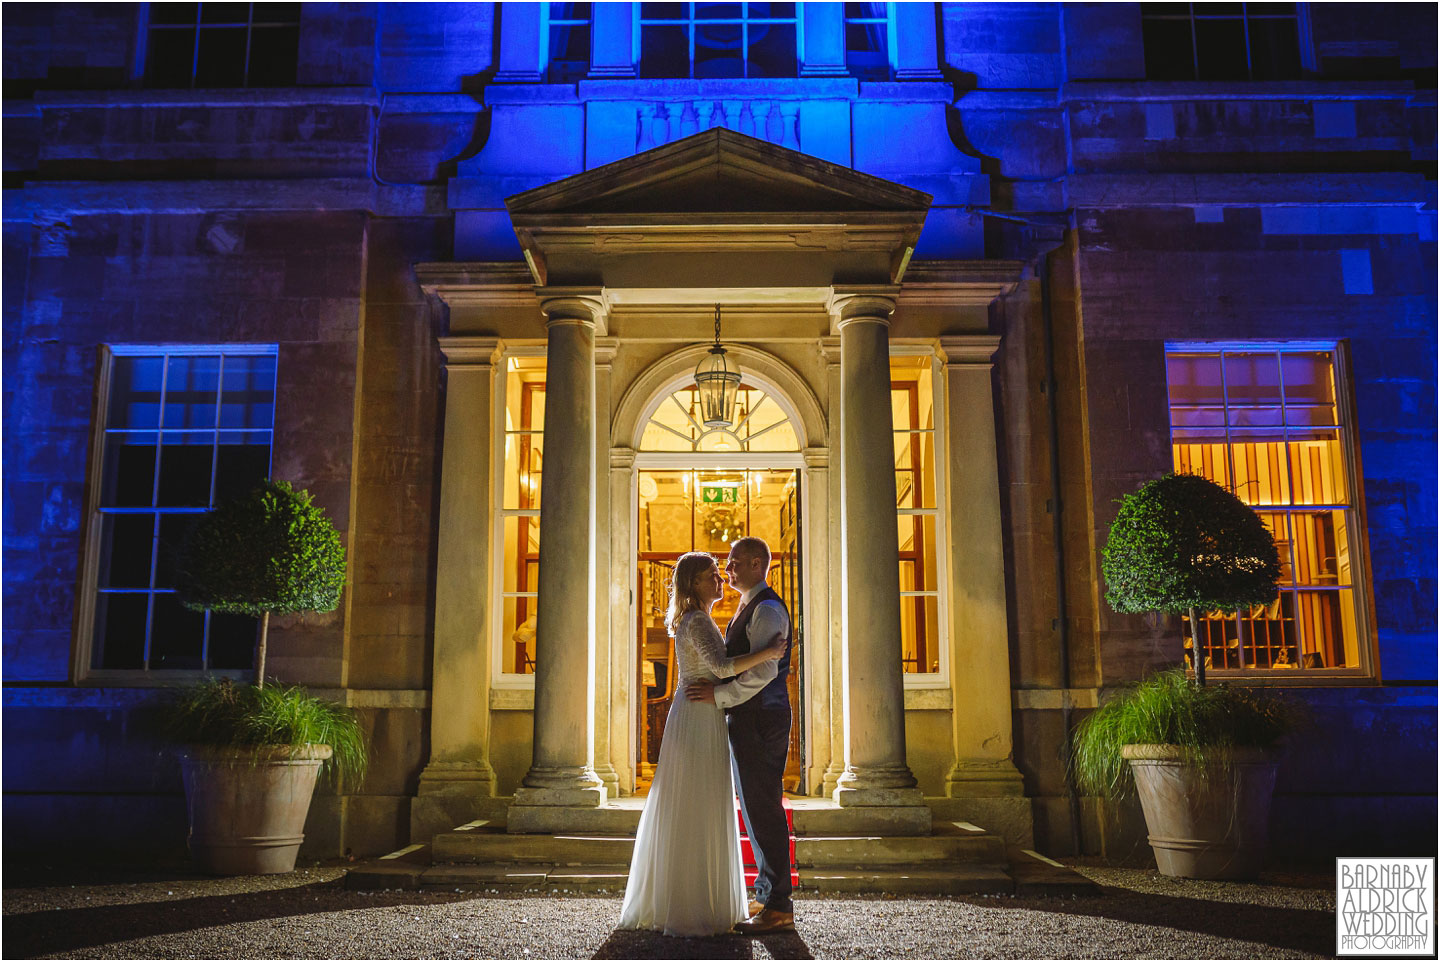 Evening wedding photos at Bowcliffe hall in Yorkshire